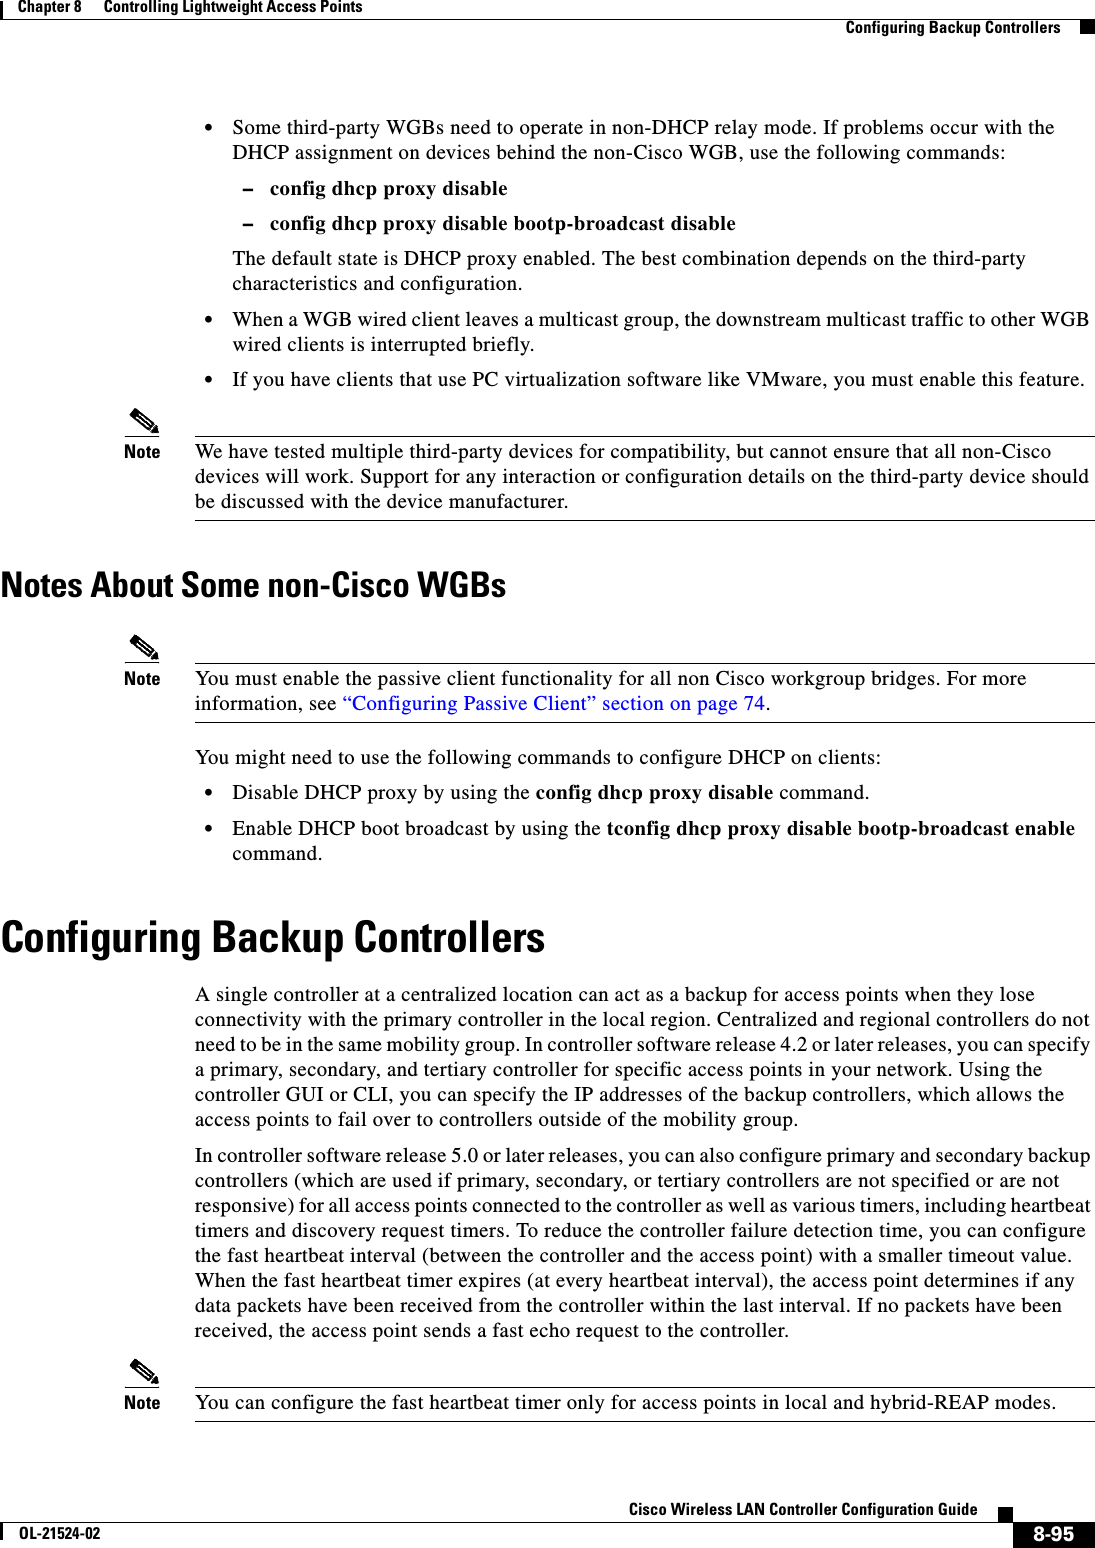  8-95Cisco Wireless LAN Controller Configuration GuideOL-21524-02Chapter 8      Controlling Lightweight Access Points  Configuring Backup Controllers  • Some third-party WGBs need to operate in non-DHCP relay mode. If problems occur with the DHCP assignment on devices behind the non-Cisco WGB, use the following commands:  –config dhcp proxy disable  –config dhcp proxy disable bootp-broadcast disableThe default state is DHCP proxy enabled. The best combination depends on the third-party characteristics and configuration.   • When a WGB wired client leaves a multicast group, the downstream multicast traffic to other WGB wired clients is interrupted briefly.  • If you have clients that use PC virtualization software like VMware, you must enable this feature.Note We have tested multiple third-party devices for compatibility, but cannot ensure that all non-Cisco devices will work. Support for any interaction or configuration details on the third-party device should be discussed with the device manufacturer.Notes About Some non-Cisco WGBsNote You must enable the passive client functionality for all non Cisco workgroup bridges. For more information, see “Configuring Passive Client” section on page 74.You might need to use the following commands to configure DHCP on clients:  • Disable DHCP proxy by using the config dhcp proxy disable command.  • Enable DHCP boot broadcast by using the tconfig dhcp proxy disable bootp-broadcast enable command.Configuring Backup ControllersA single controller at a centralized location can act as a backup for access points when they lose connectivity with the primary controller in the local region. Centralized and regional controllers do not need to be in the same mobility group. In controller software release 4.2 or later releases, you can specify a primary, secondary, and tertiary controller for specific access points in your network. Using the controller GUI or CLI, you can specify the IP addresses of the backup controllers, which allows the access points to fail over to controllers outside of the mobility group.In controller software release 5.0 or later releases, you can also configure primary and secondary backup controllers (which are used if primary, secondary, or tertiary controllers are not specified or are not responsive) for all access points connected to the controller as well as various timers, including heartbeat timers and discovery request timers. To reduce the controller failure detection time, you can configure the fast heartbeat interval (between the controller and the access point) with a smaller timeout value. When the fast heartbeat timer expires (at every heartbeat interval), the access point determines if any data packets have been received from the controller within the last interval. If no packets have been received, the access point sends a fast echo request to the controller.Note You can configure the fast heartbeat timer only for access points in local and hybrid-REAP modes.